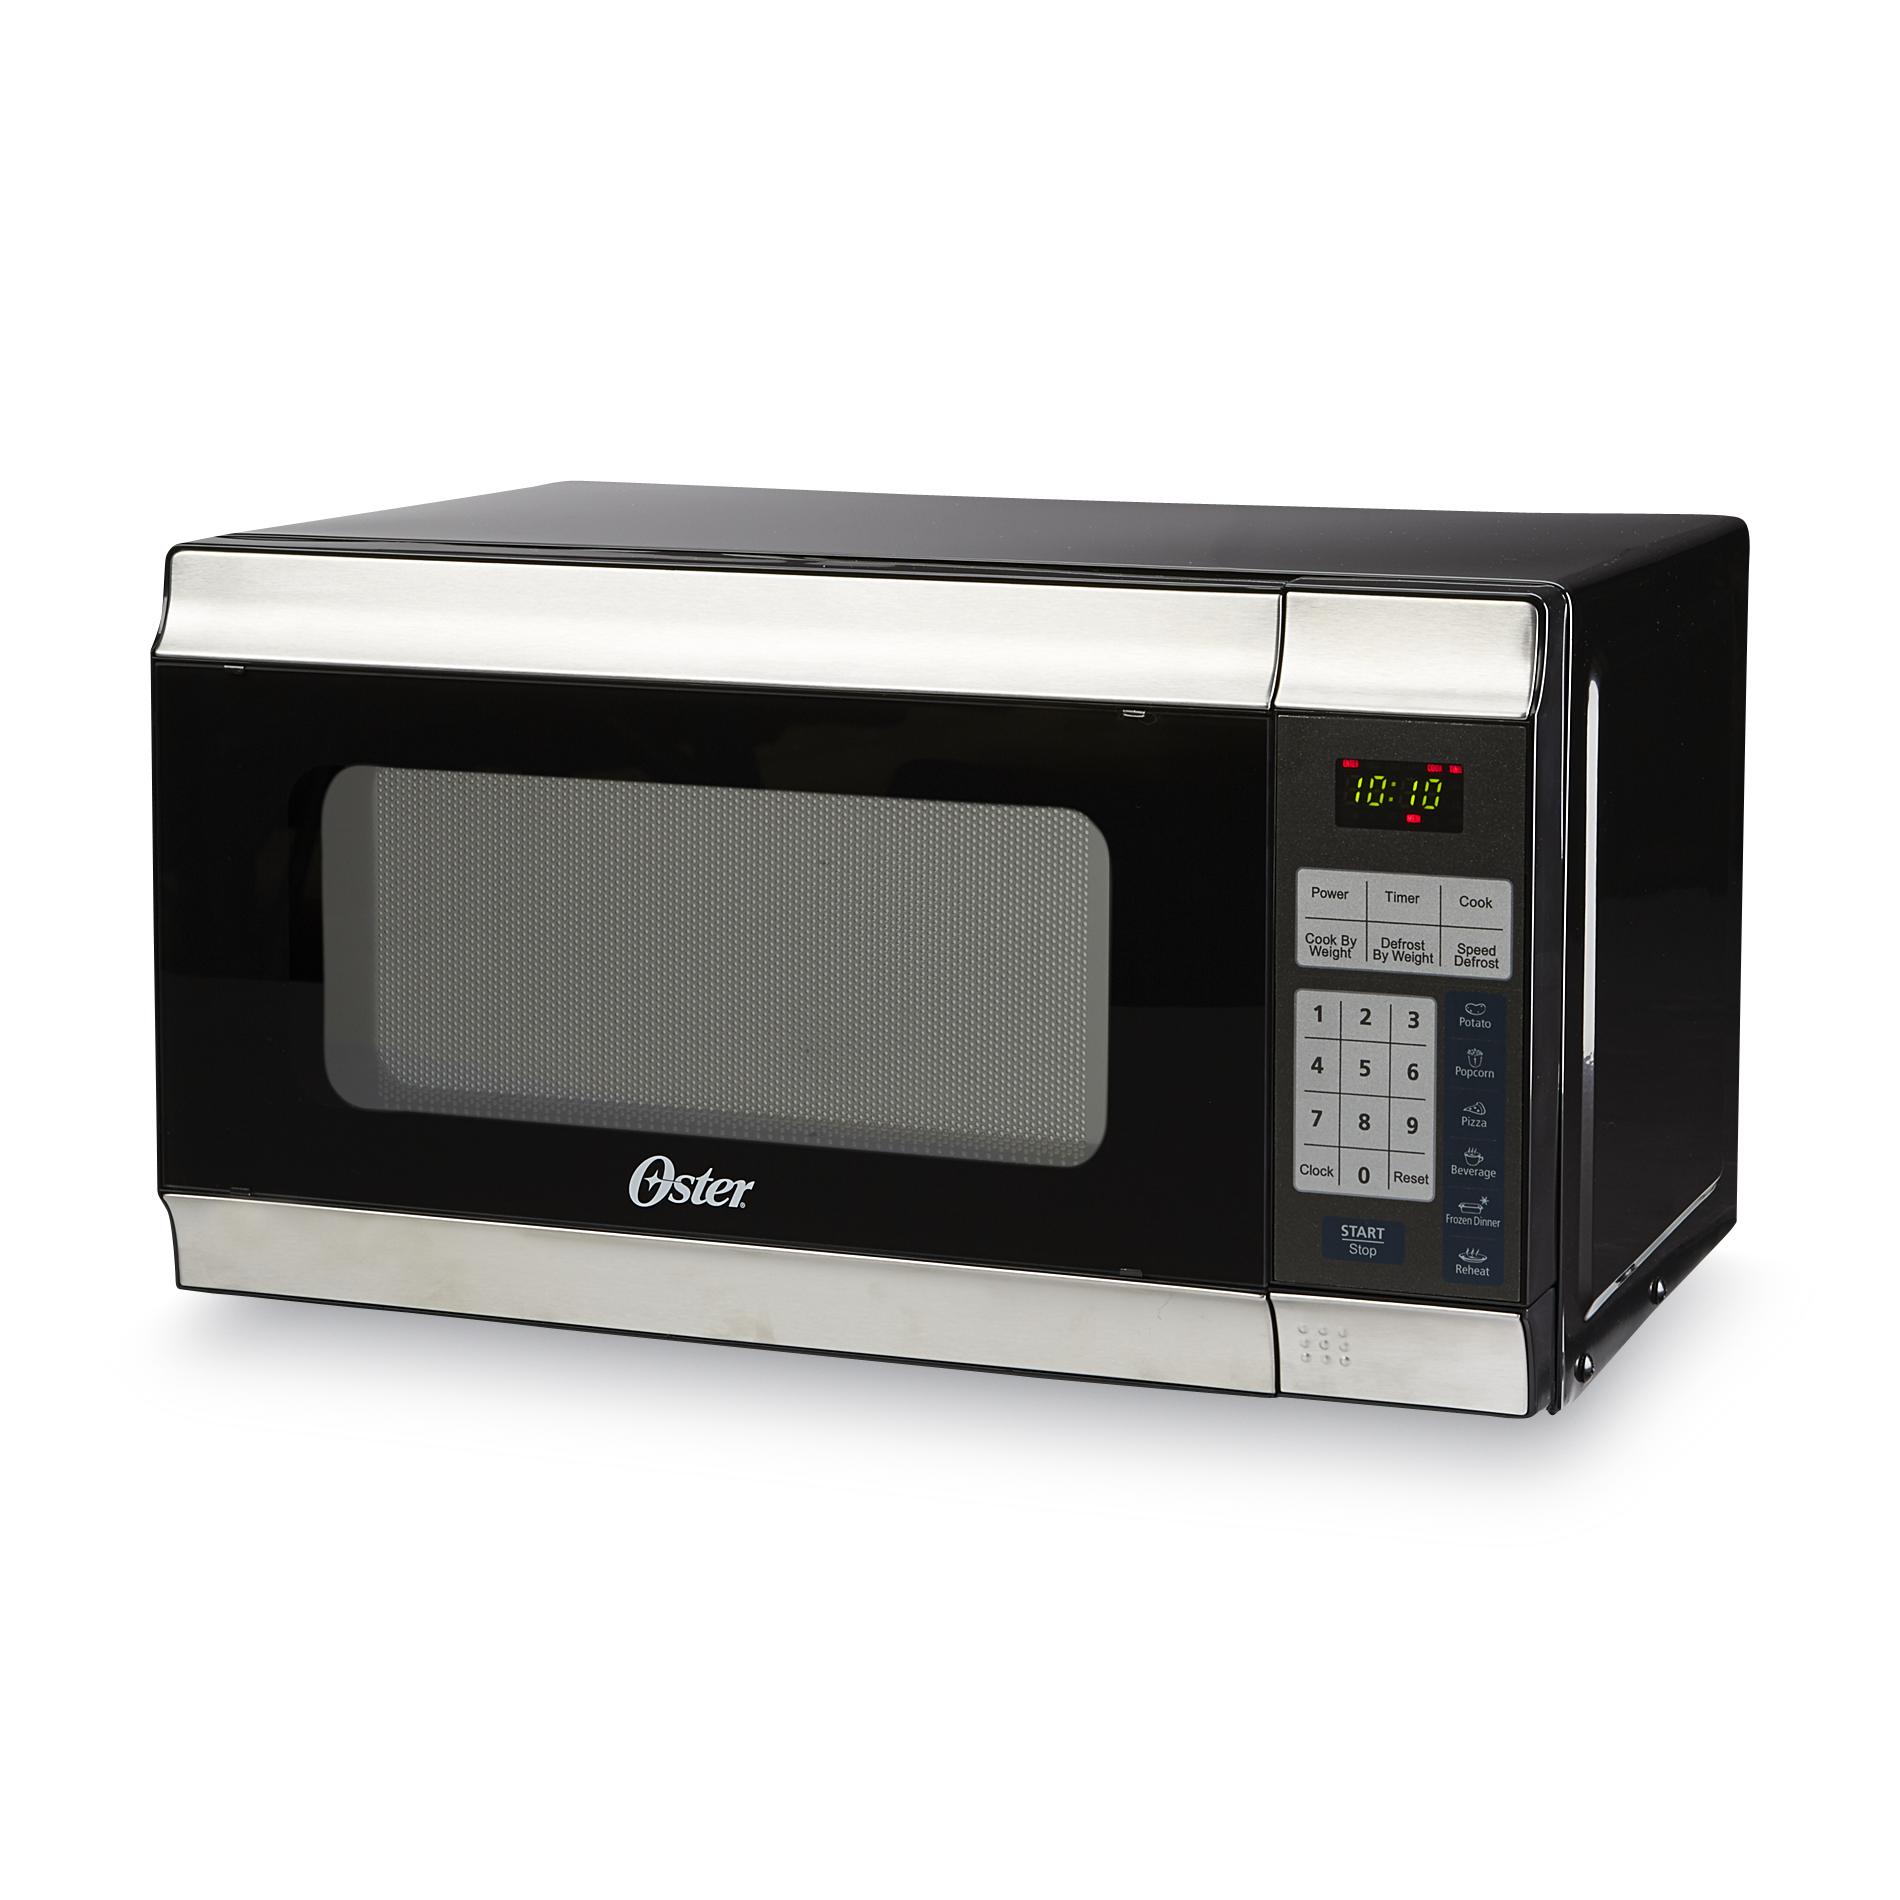 Oster OGT6701 0.7 Cu. Ft. Black/Stainless Steel Microwave